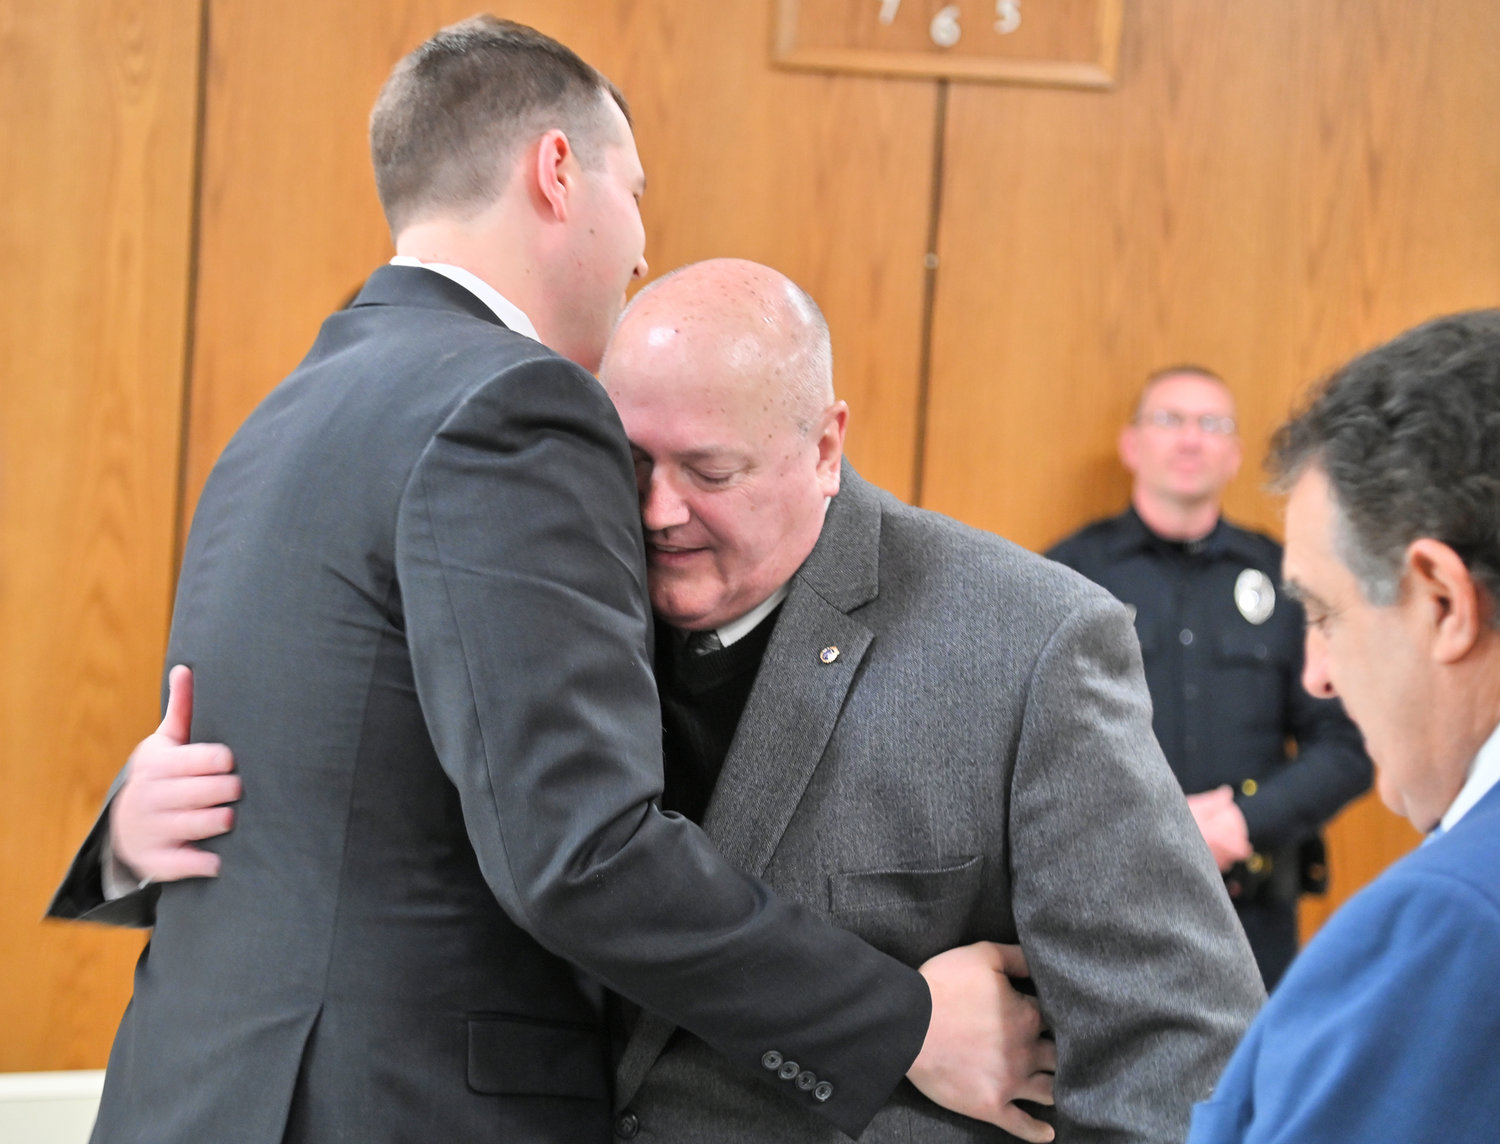 FATHER AND SON — Longtime Utica Police Chief Mark Williams hugs his son, Stephen Williams, during the son's swearing in ceremony at Utica City Hall on Friday. Stephen Williams is now a third generation Utica police officer.